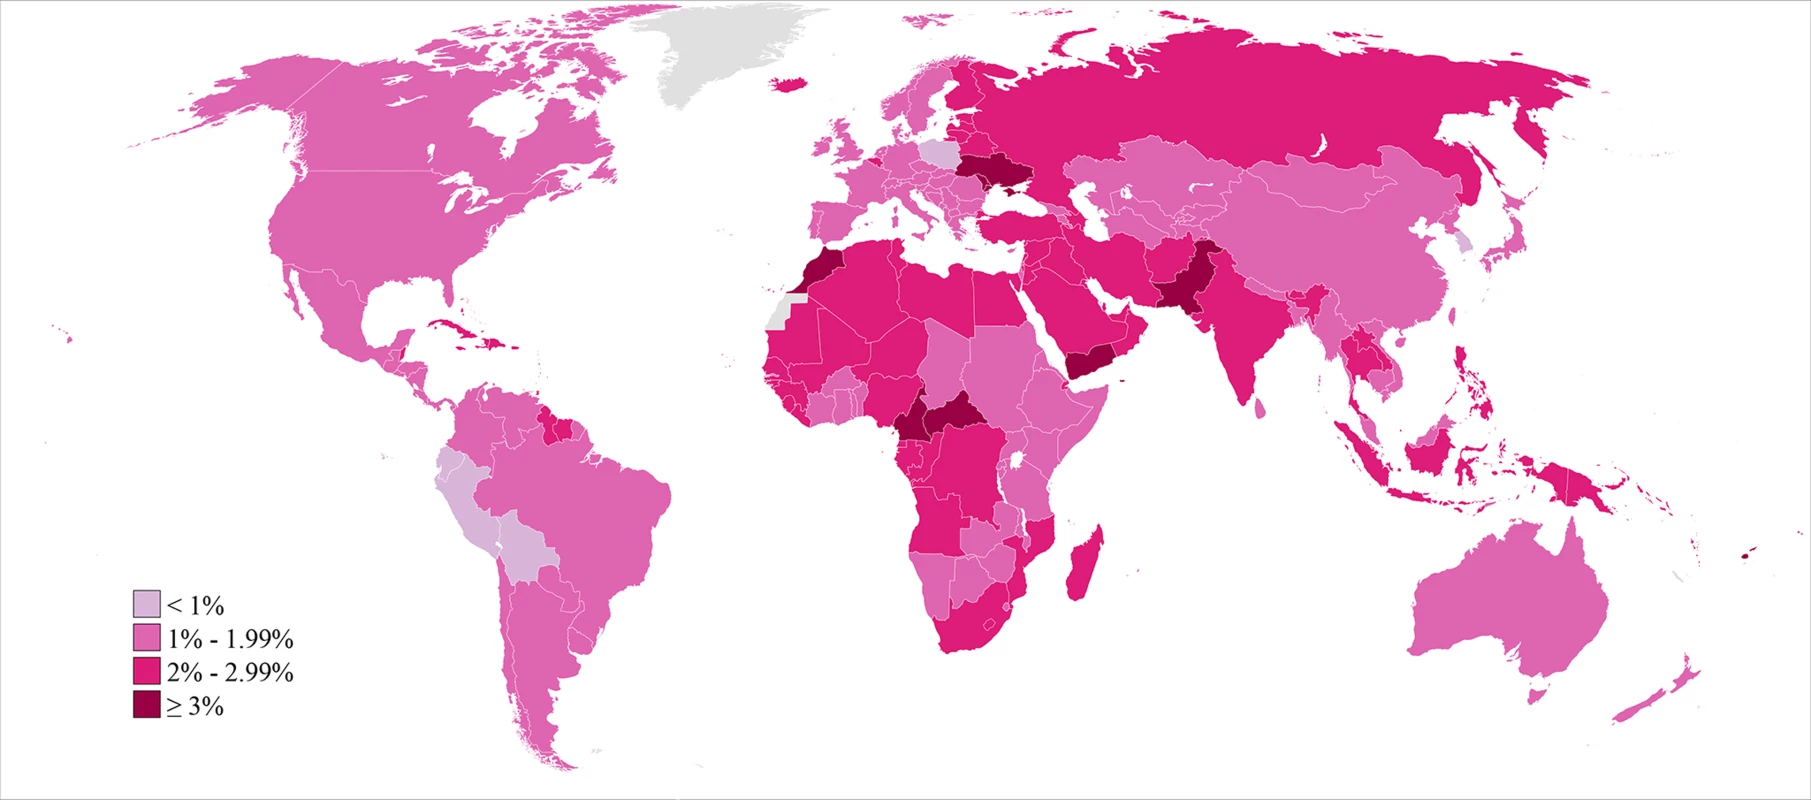 Prevalence of primary infertility among women who seek a child, in 2010.